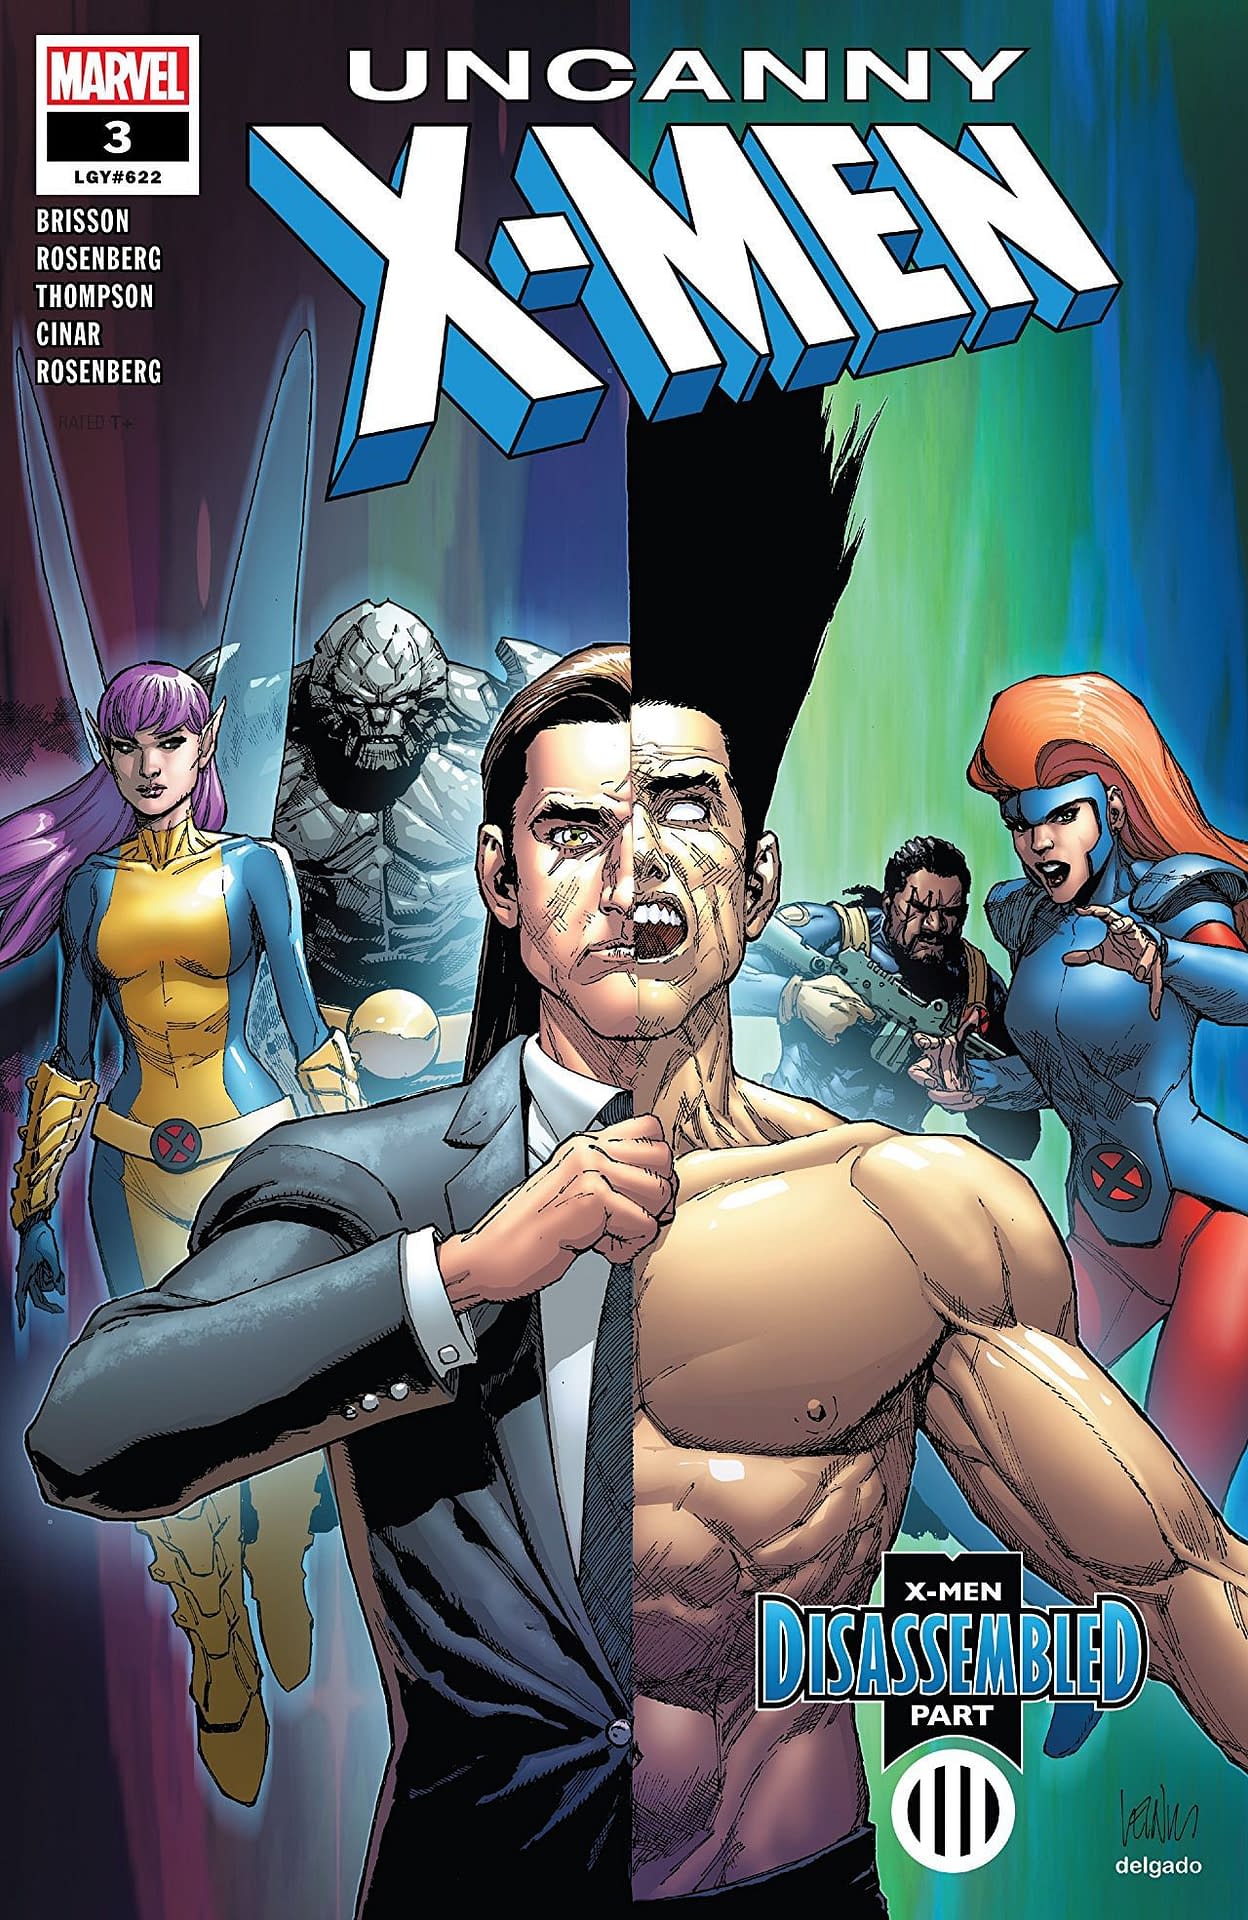 Bishop Respects the Free Speech Rights of Anti-Mutant Protestors in Next Week's Uncanny X-Men #3